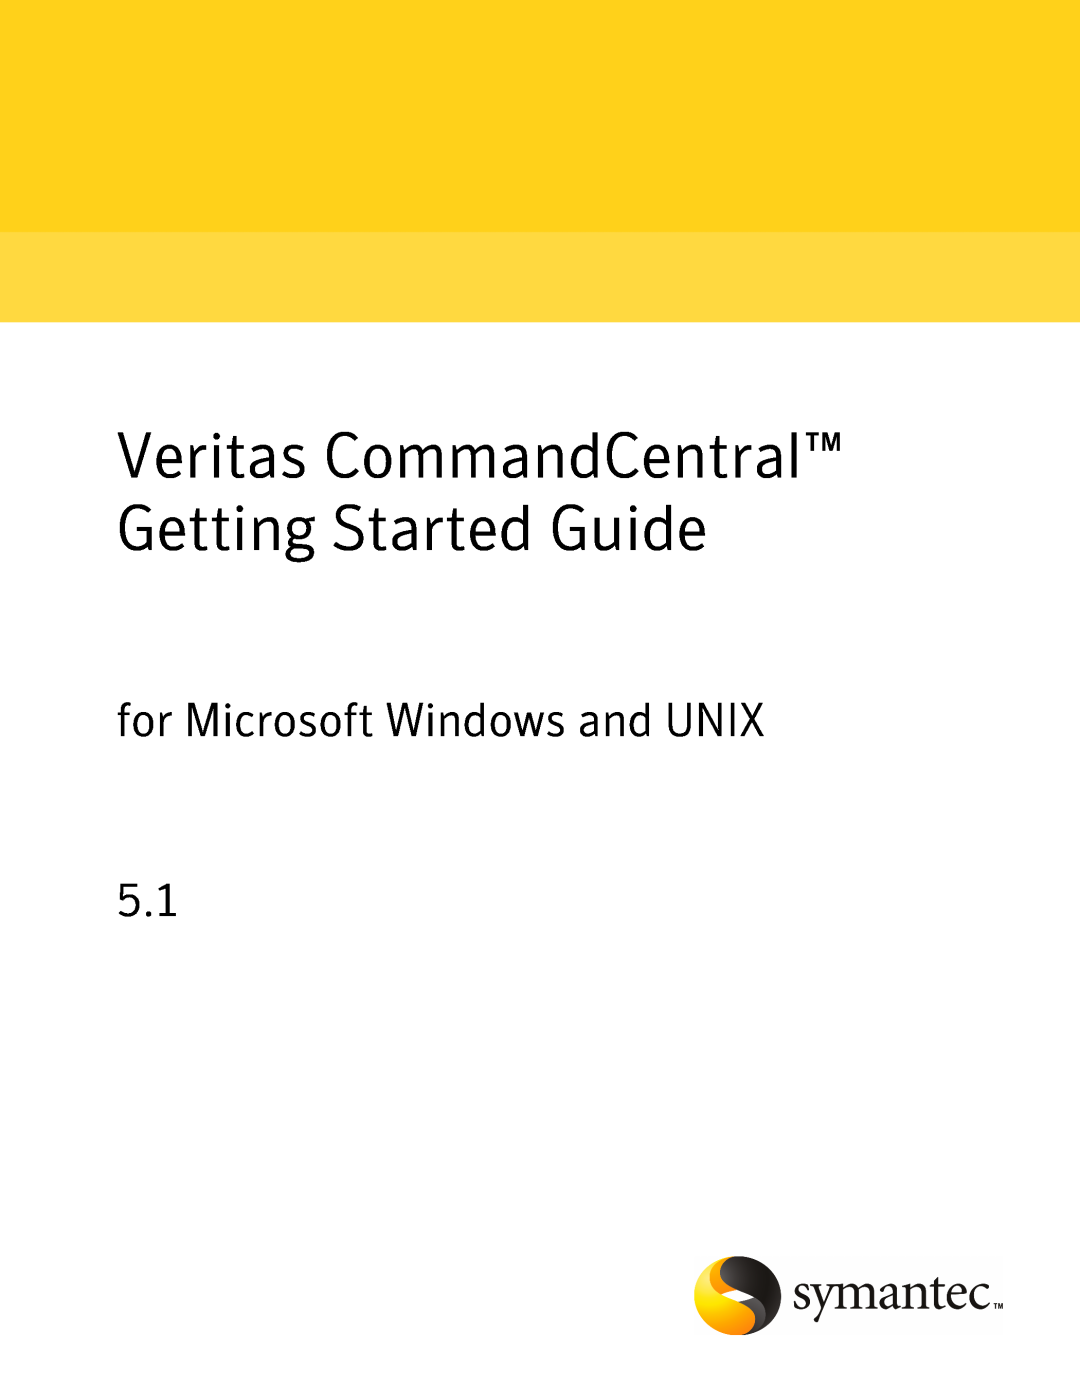 Symantec manual Veritas CommandCentral Getting Started Guide, for Microsoft Windows and UNIX 5.1 